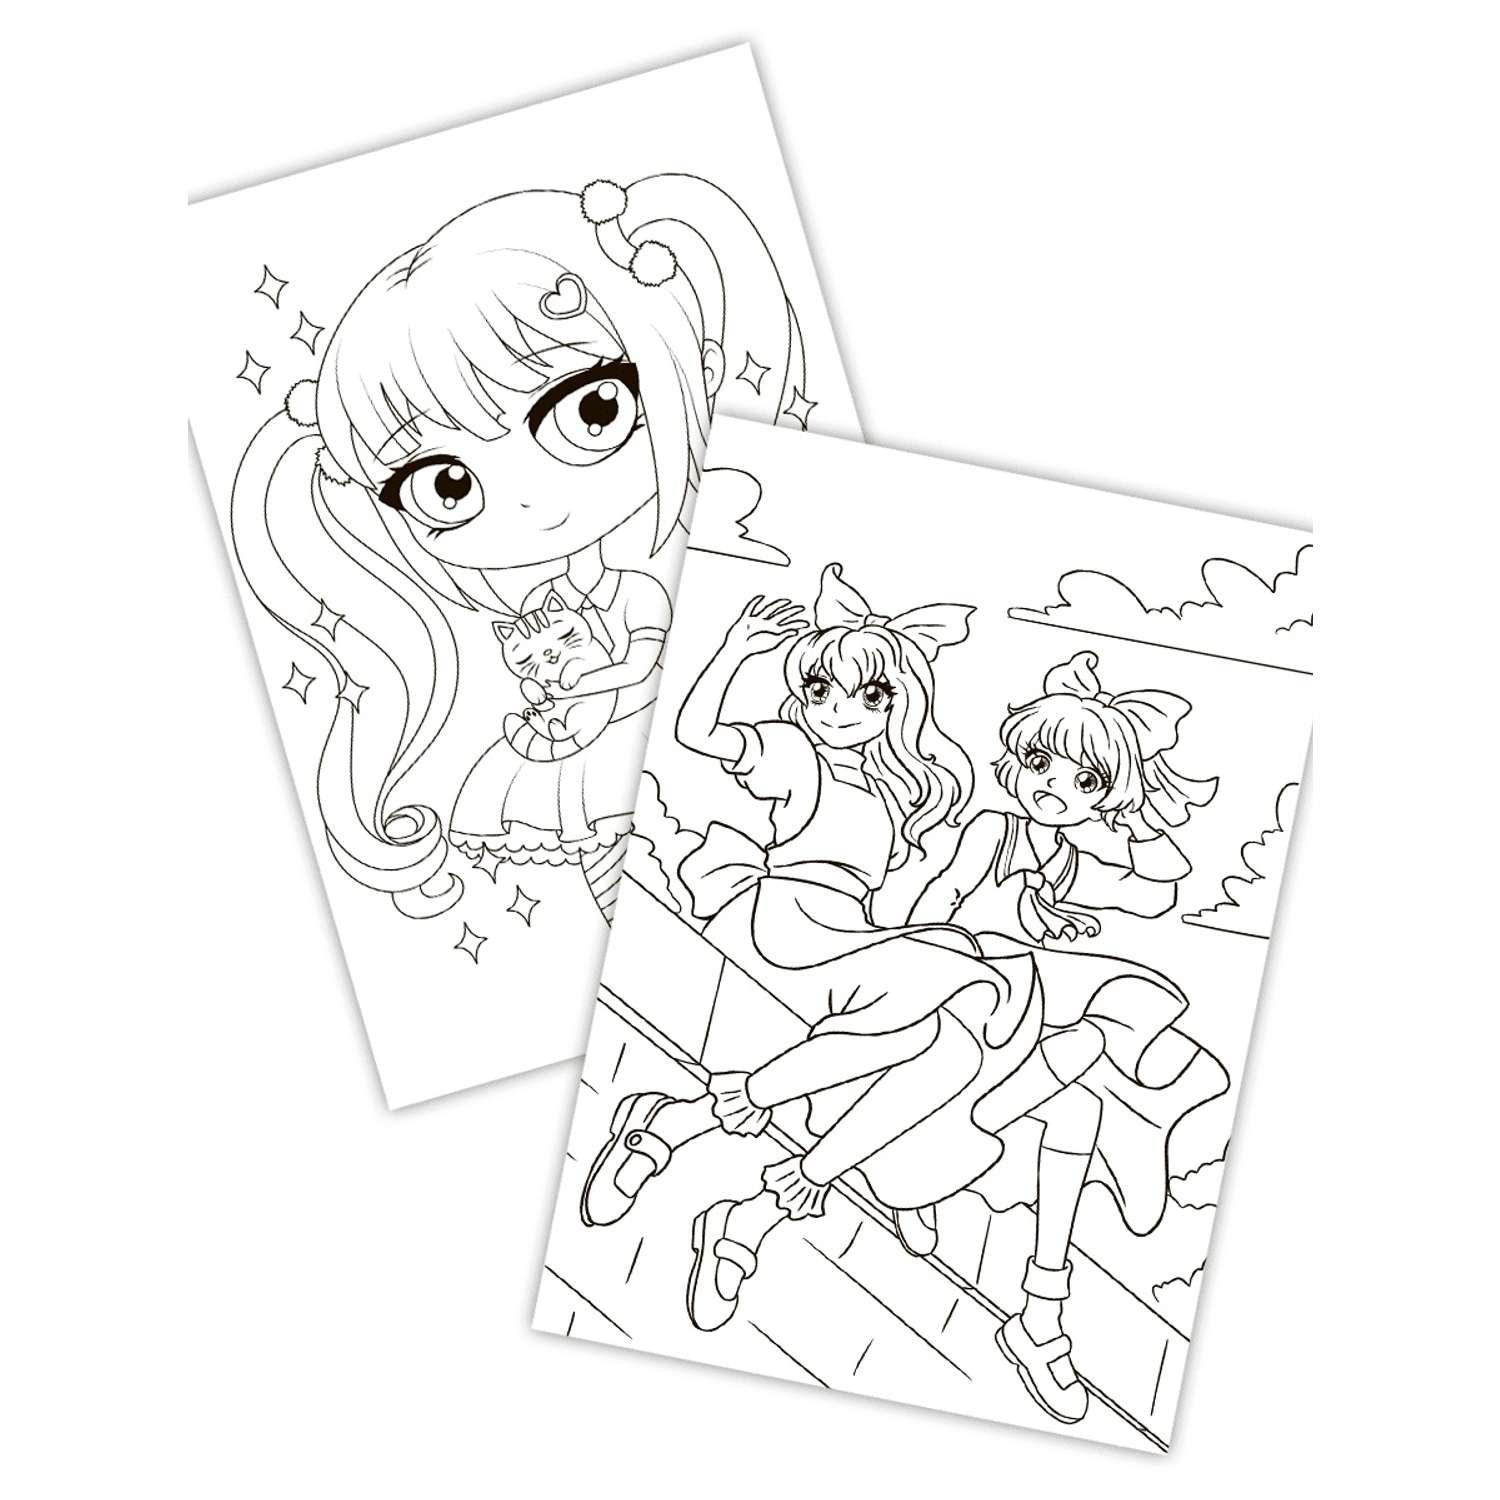 Раскраски кукол Мокси. Coloring pages Moxie Girlz. Free print coloring sheet dolls Moxie Girlz